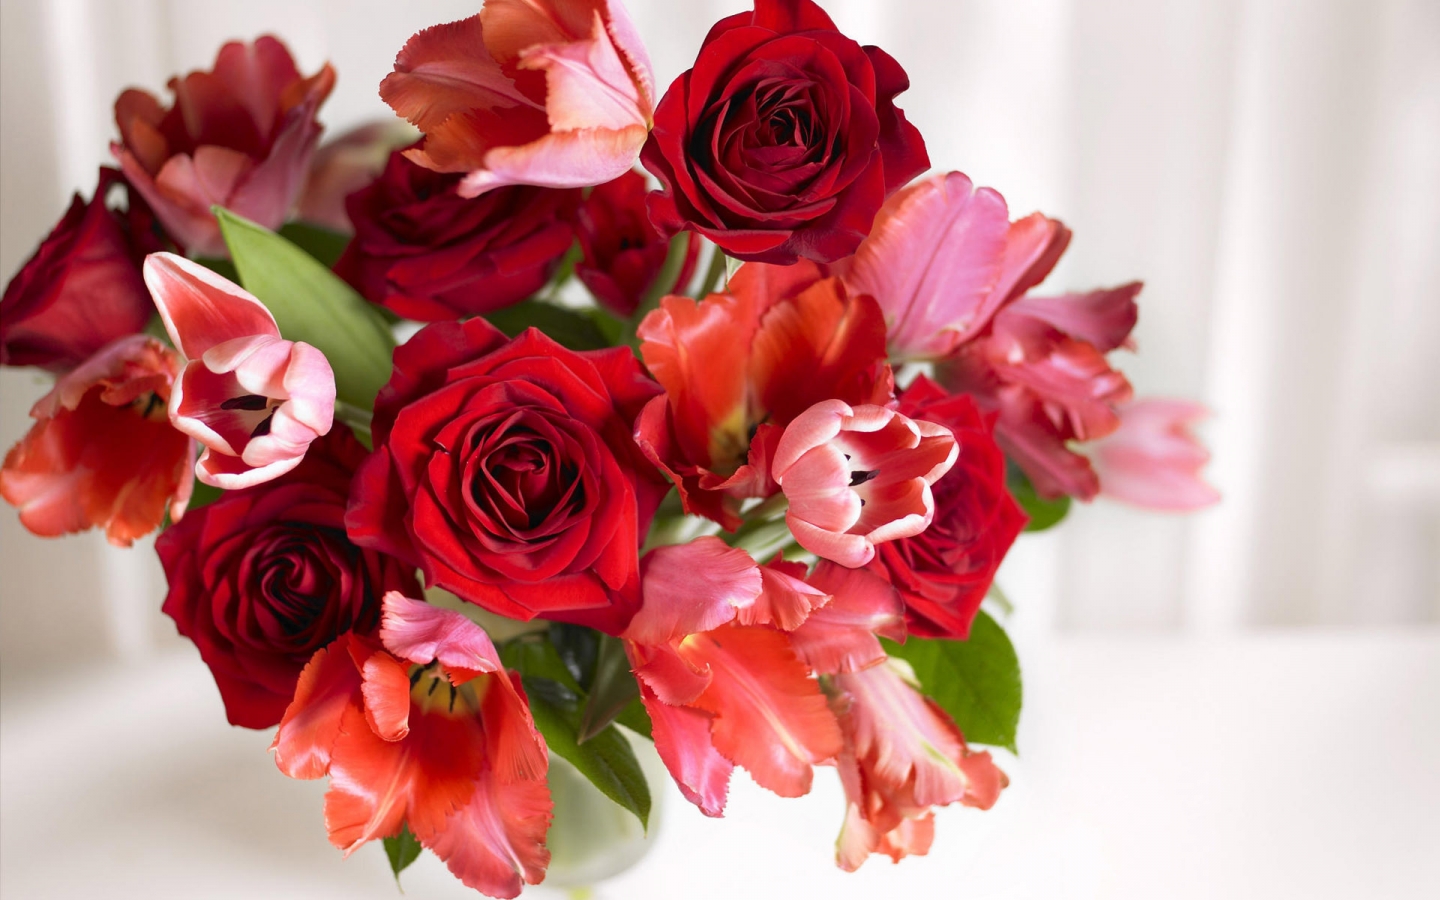 Arrangement of Roses and Tulips for 1440 x 900 widescreen resolution